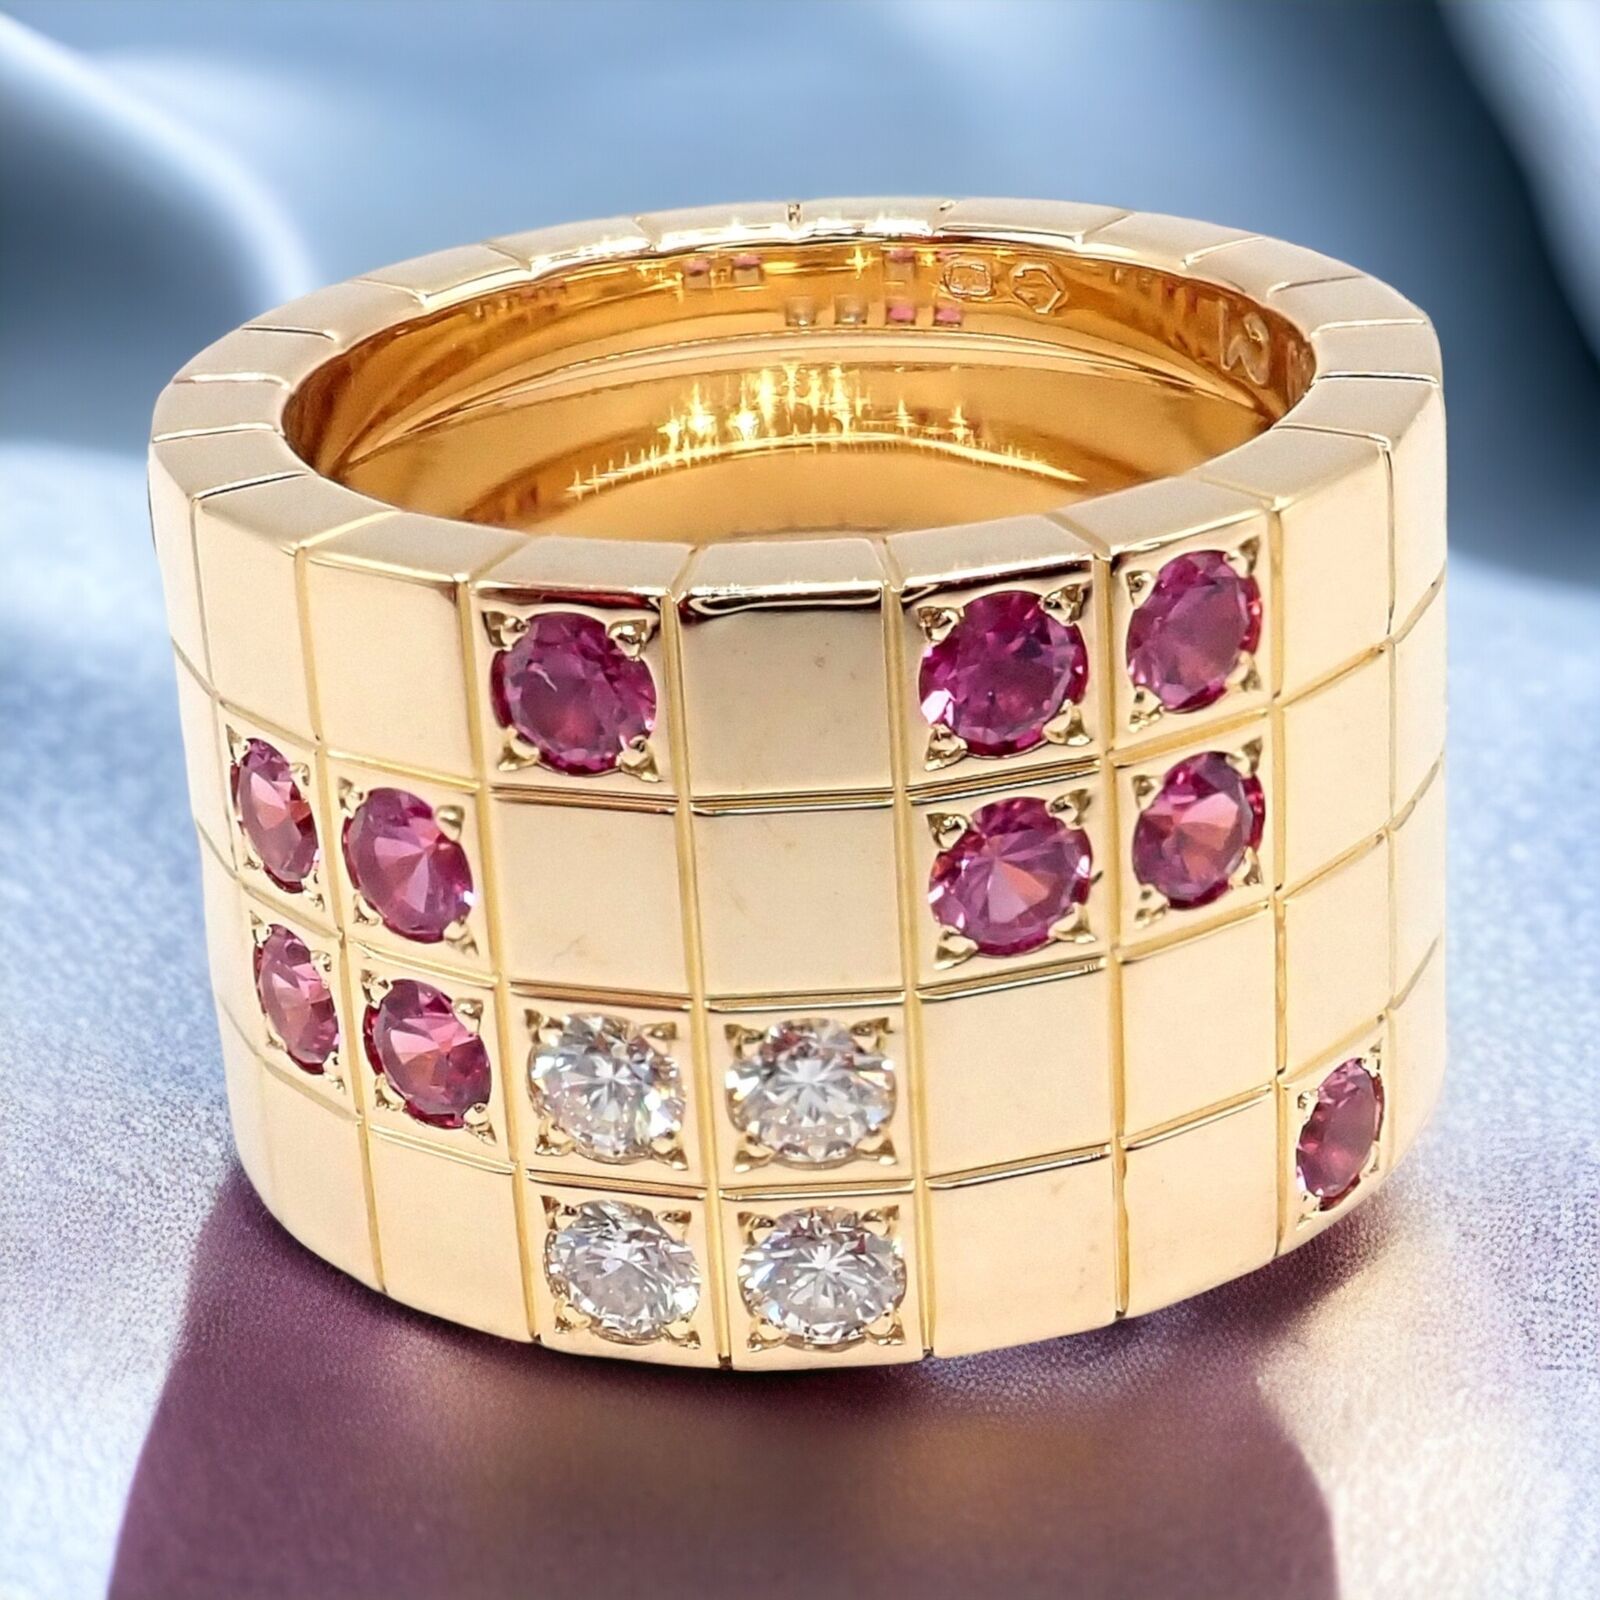 Cartier Jewelry & Watches:Fine Jewelry:Rings Authentic! Cartier 18k Rose Gold Lanieres Diamond Pink Sapphire Wide Band Ring